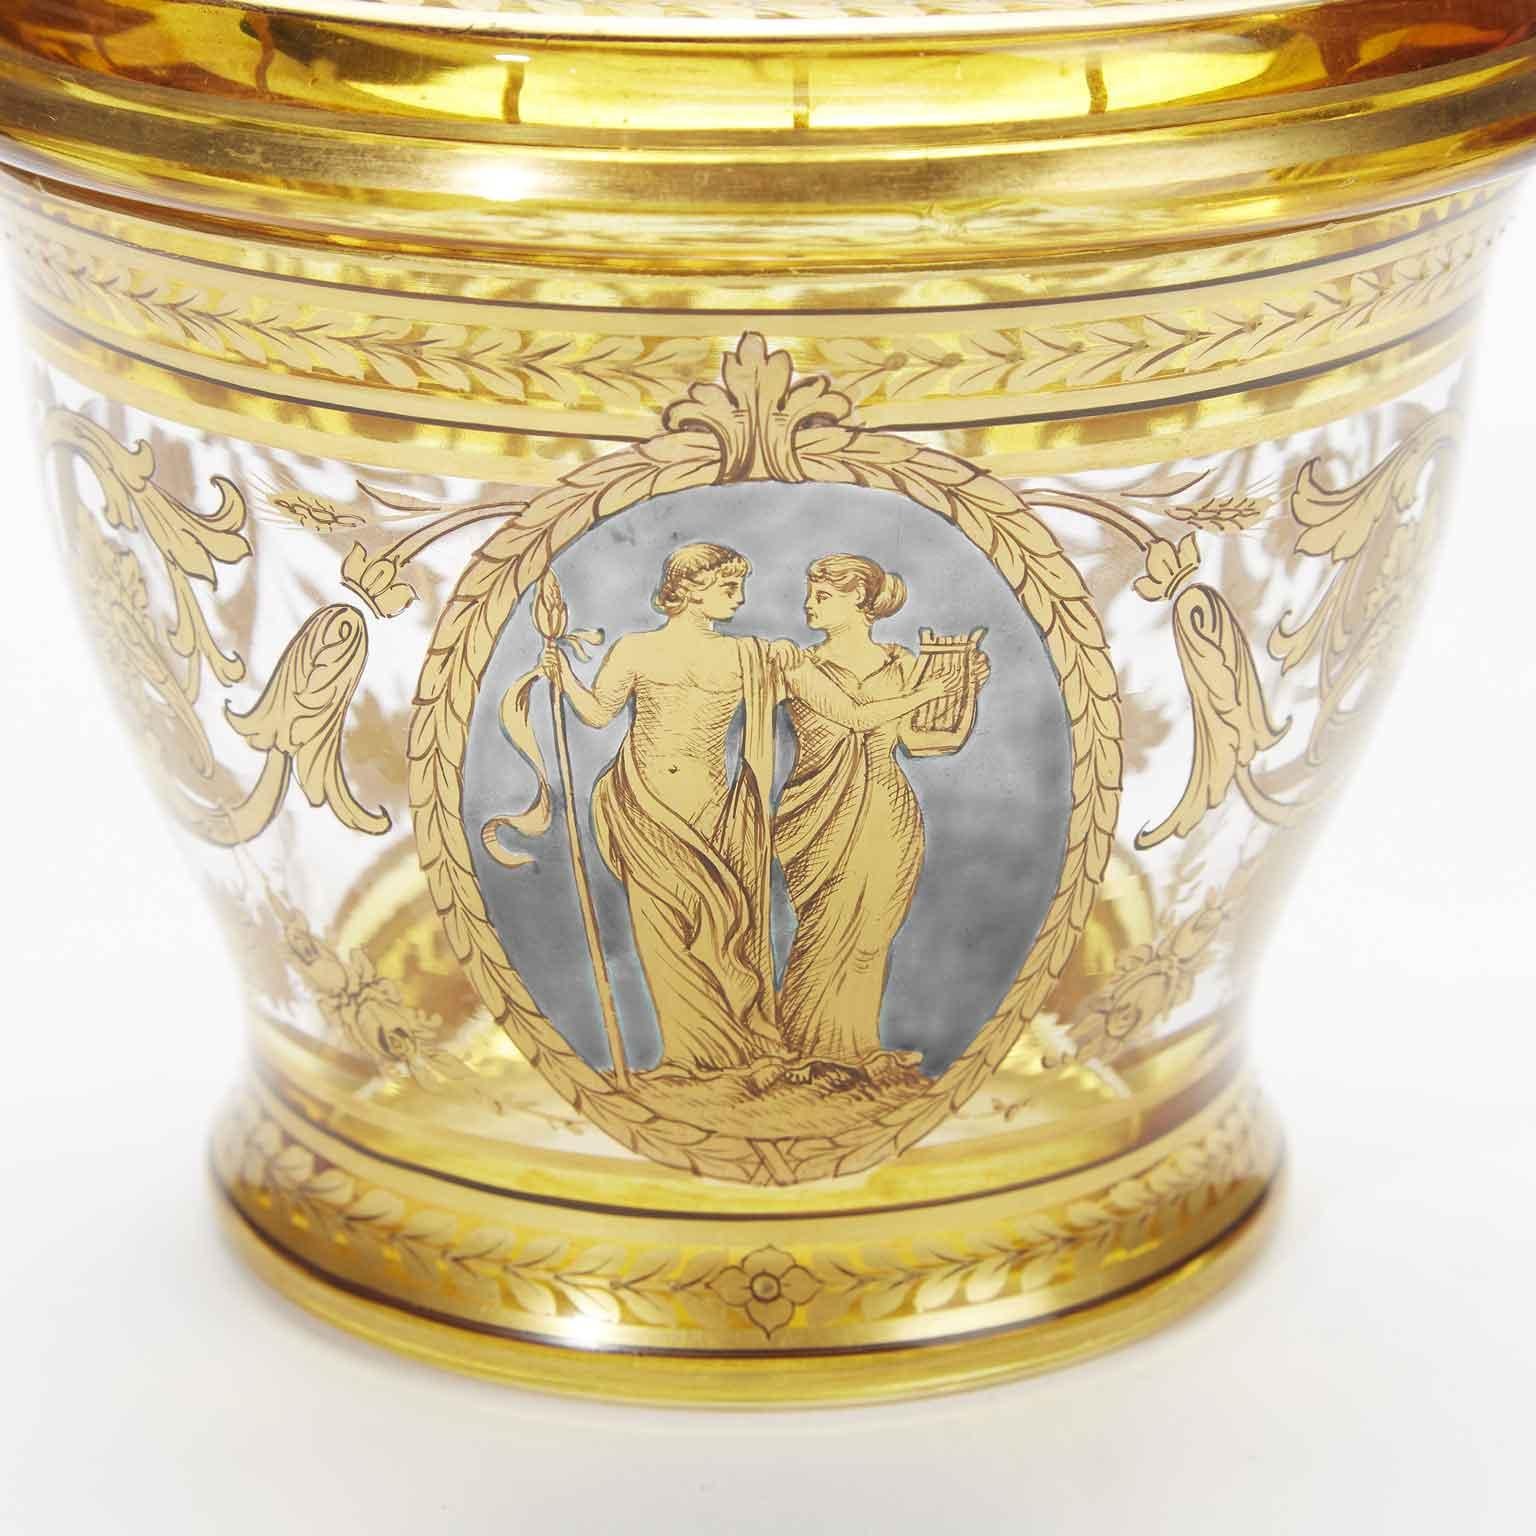 19th century Bohemian gilded crystal vase with cover, an extraordinary elegant blue and gilt crystal circular lidded box with a superlative scrolling and vegetal gilt decoration and a Biedermeier oval blue miniature with two figures.
Of Mittle